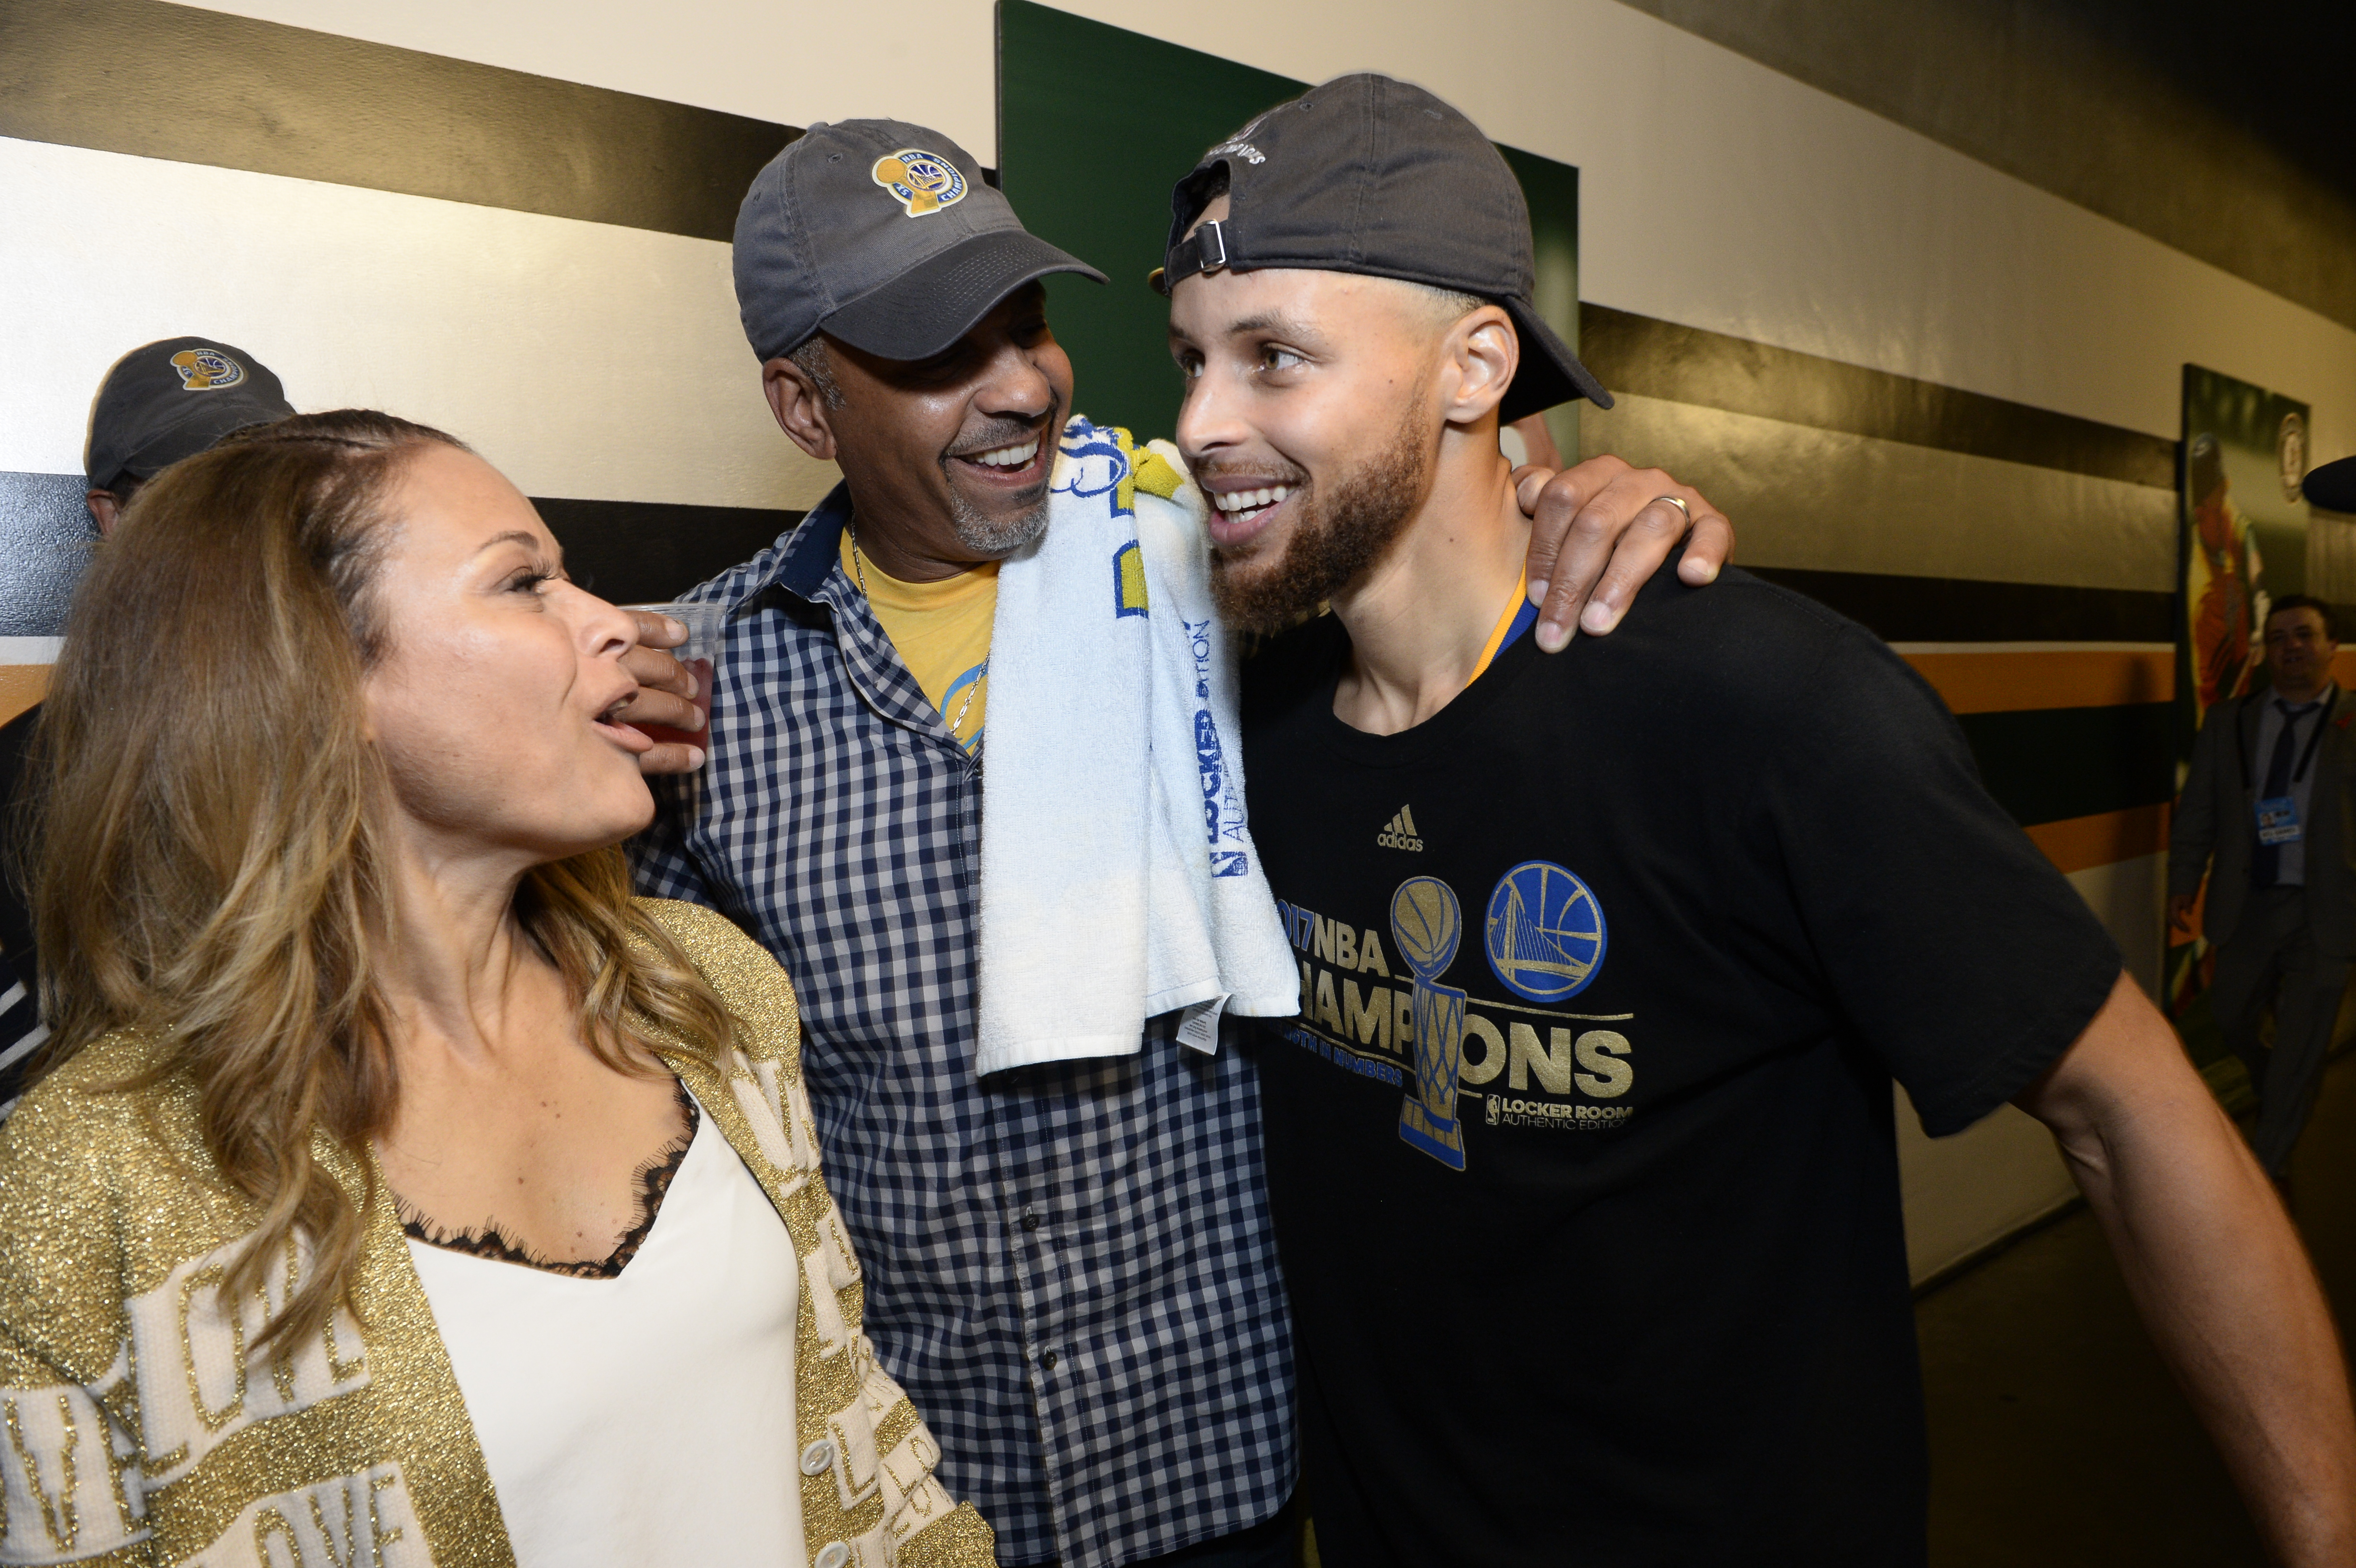 Stephen Curry celebrating with his parents Sonya and Wardell Curry after winning game five of the 2017 NBA Finals against the Cleveland Cavaliers on June 12, 2017, in Oakland, California. | Source: Getty Images